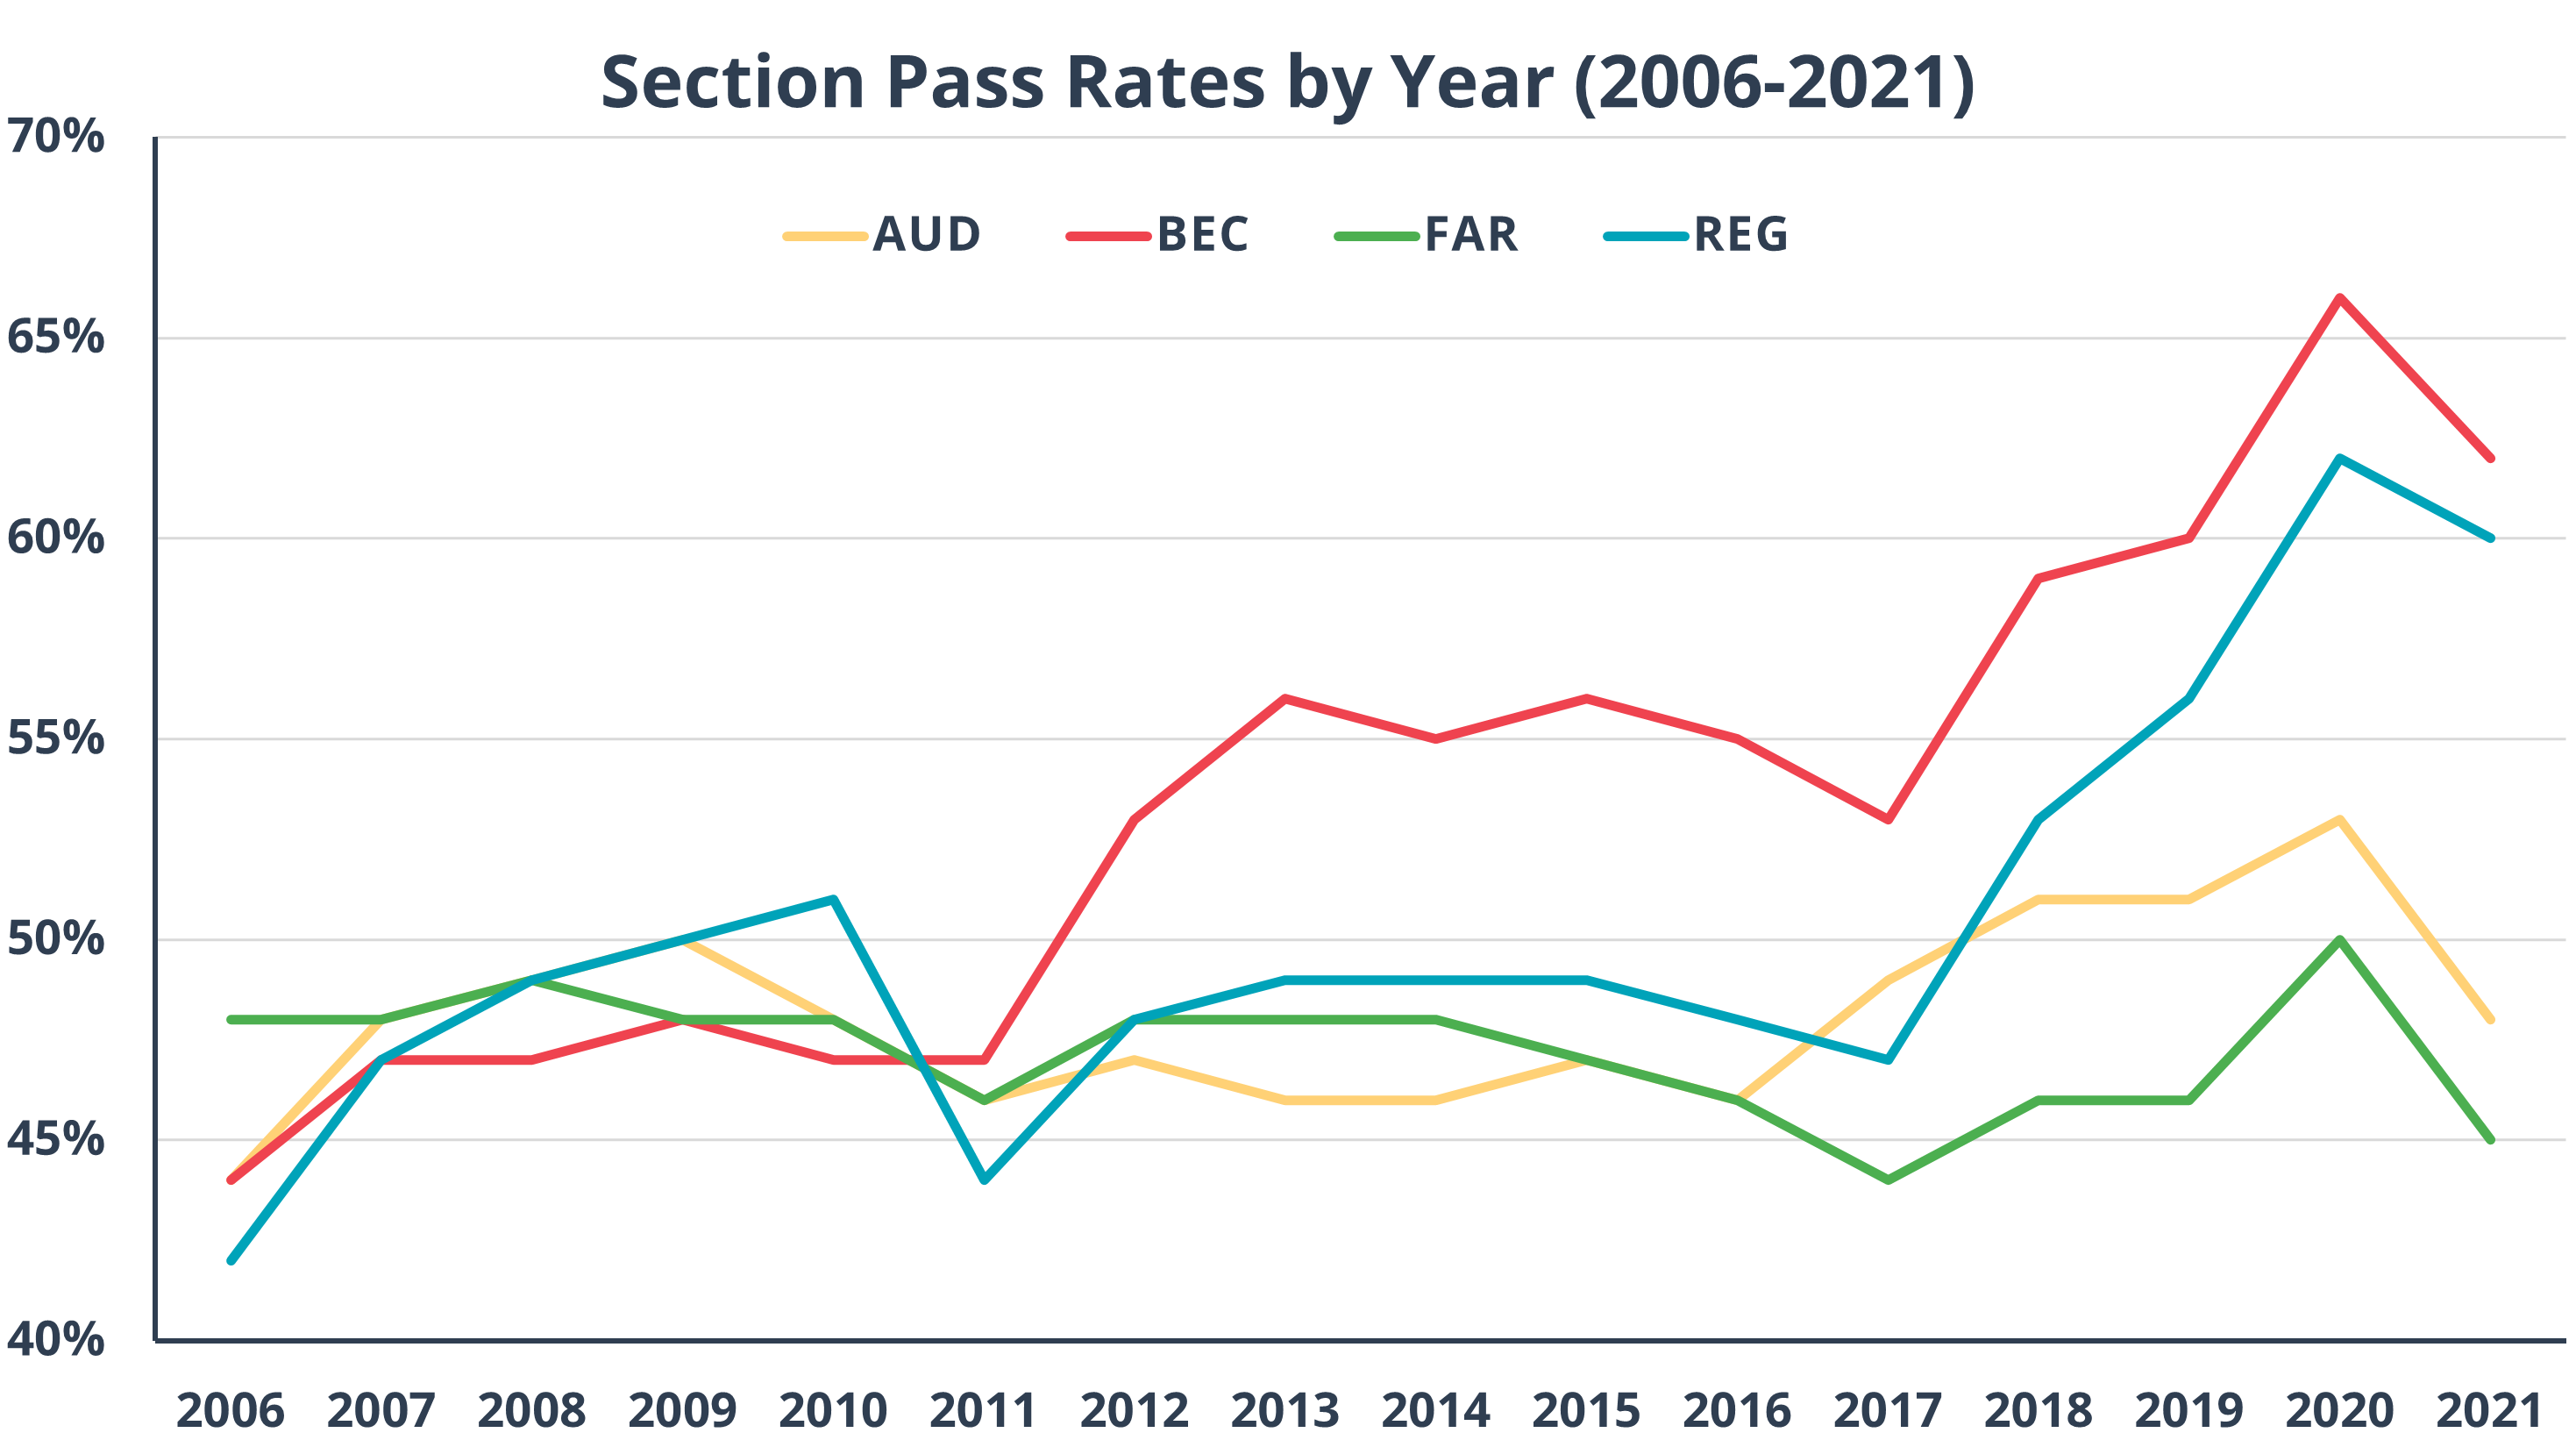 Line graph showing CPA Exam section pass rates from 2006-2021.